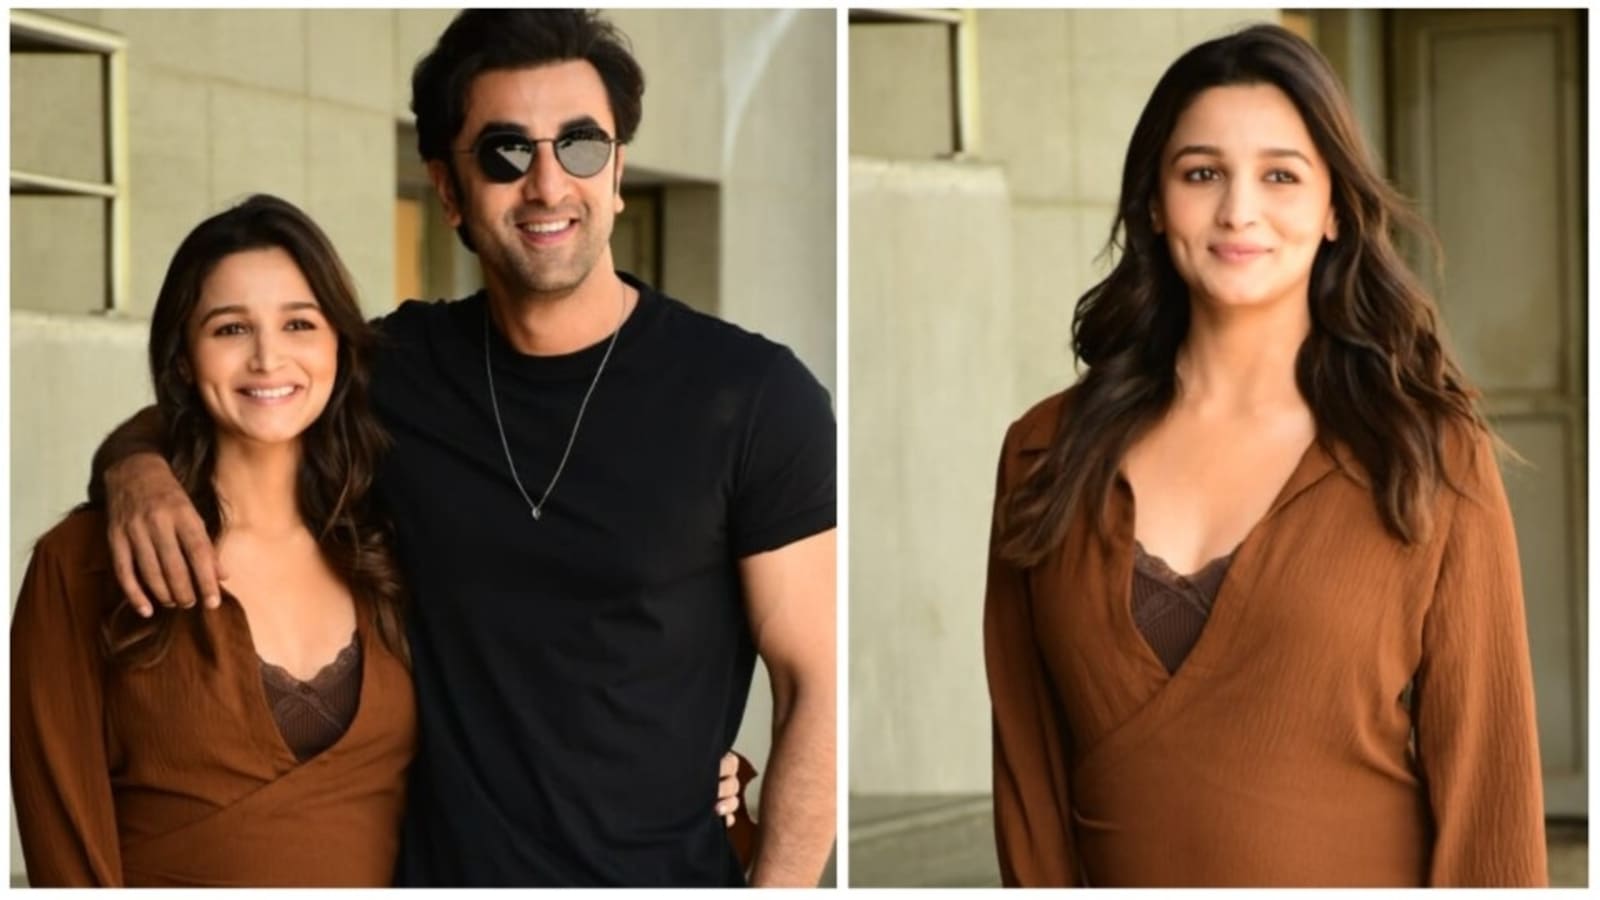 Pregnant Alia Bhatt flaunts baby bump in brown dress, dad-to-be Ranbir Kapoor complements wife in all-black outfit